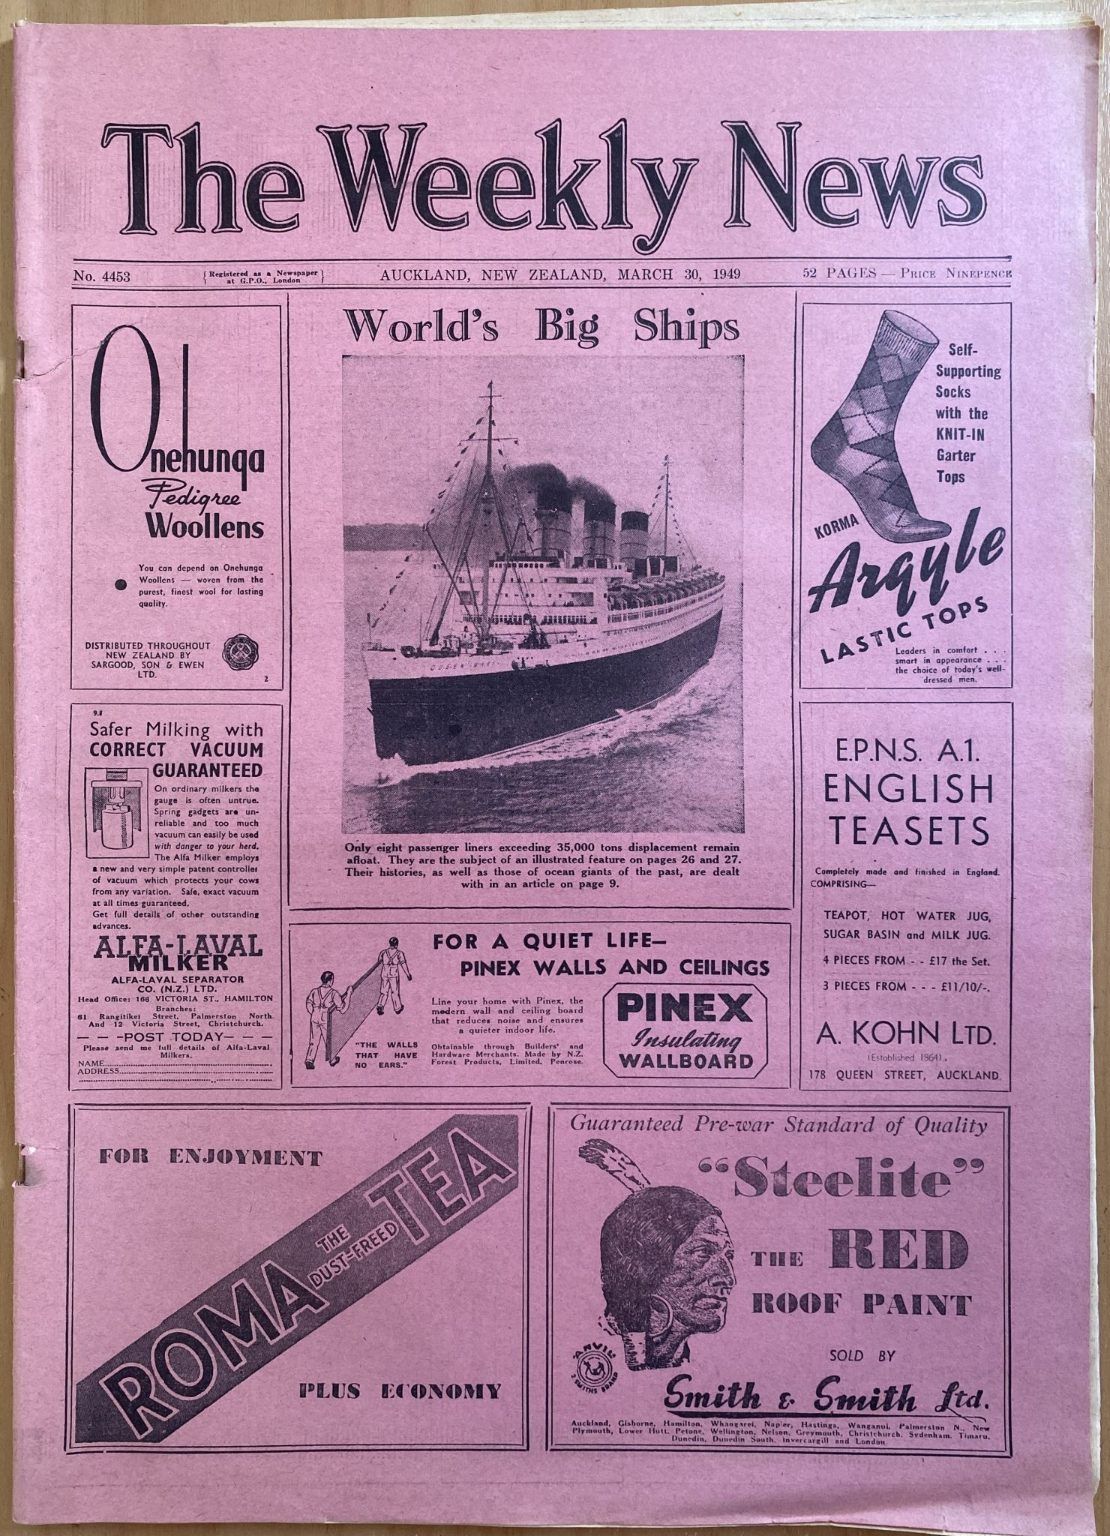 OLD NEWSPAPER: The Weekly News, No. 4453, 30 March 1949